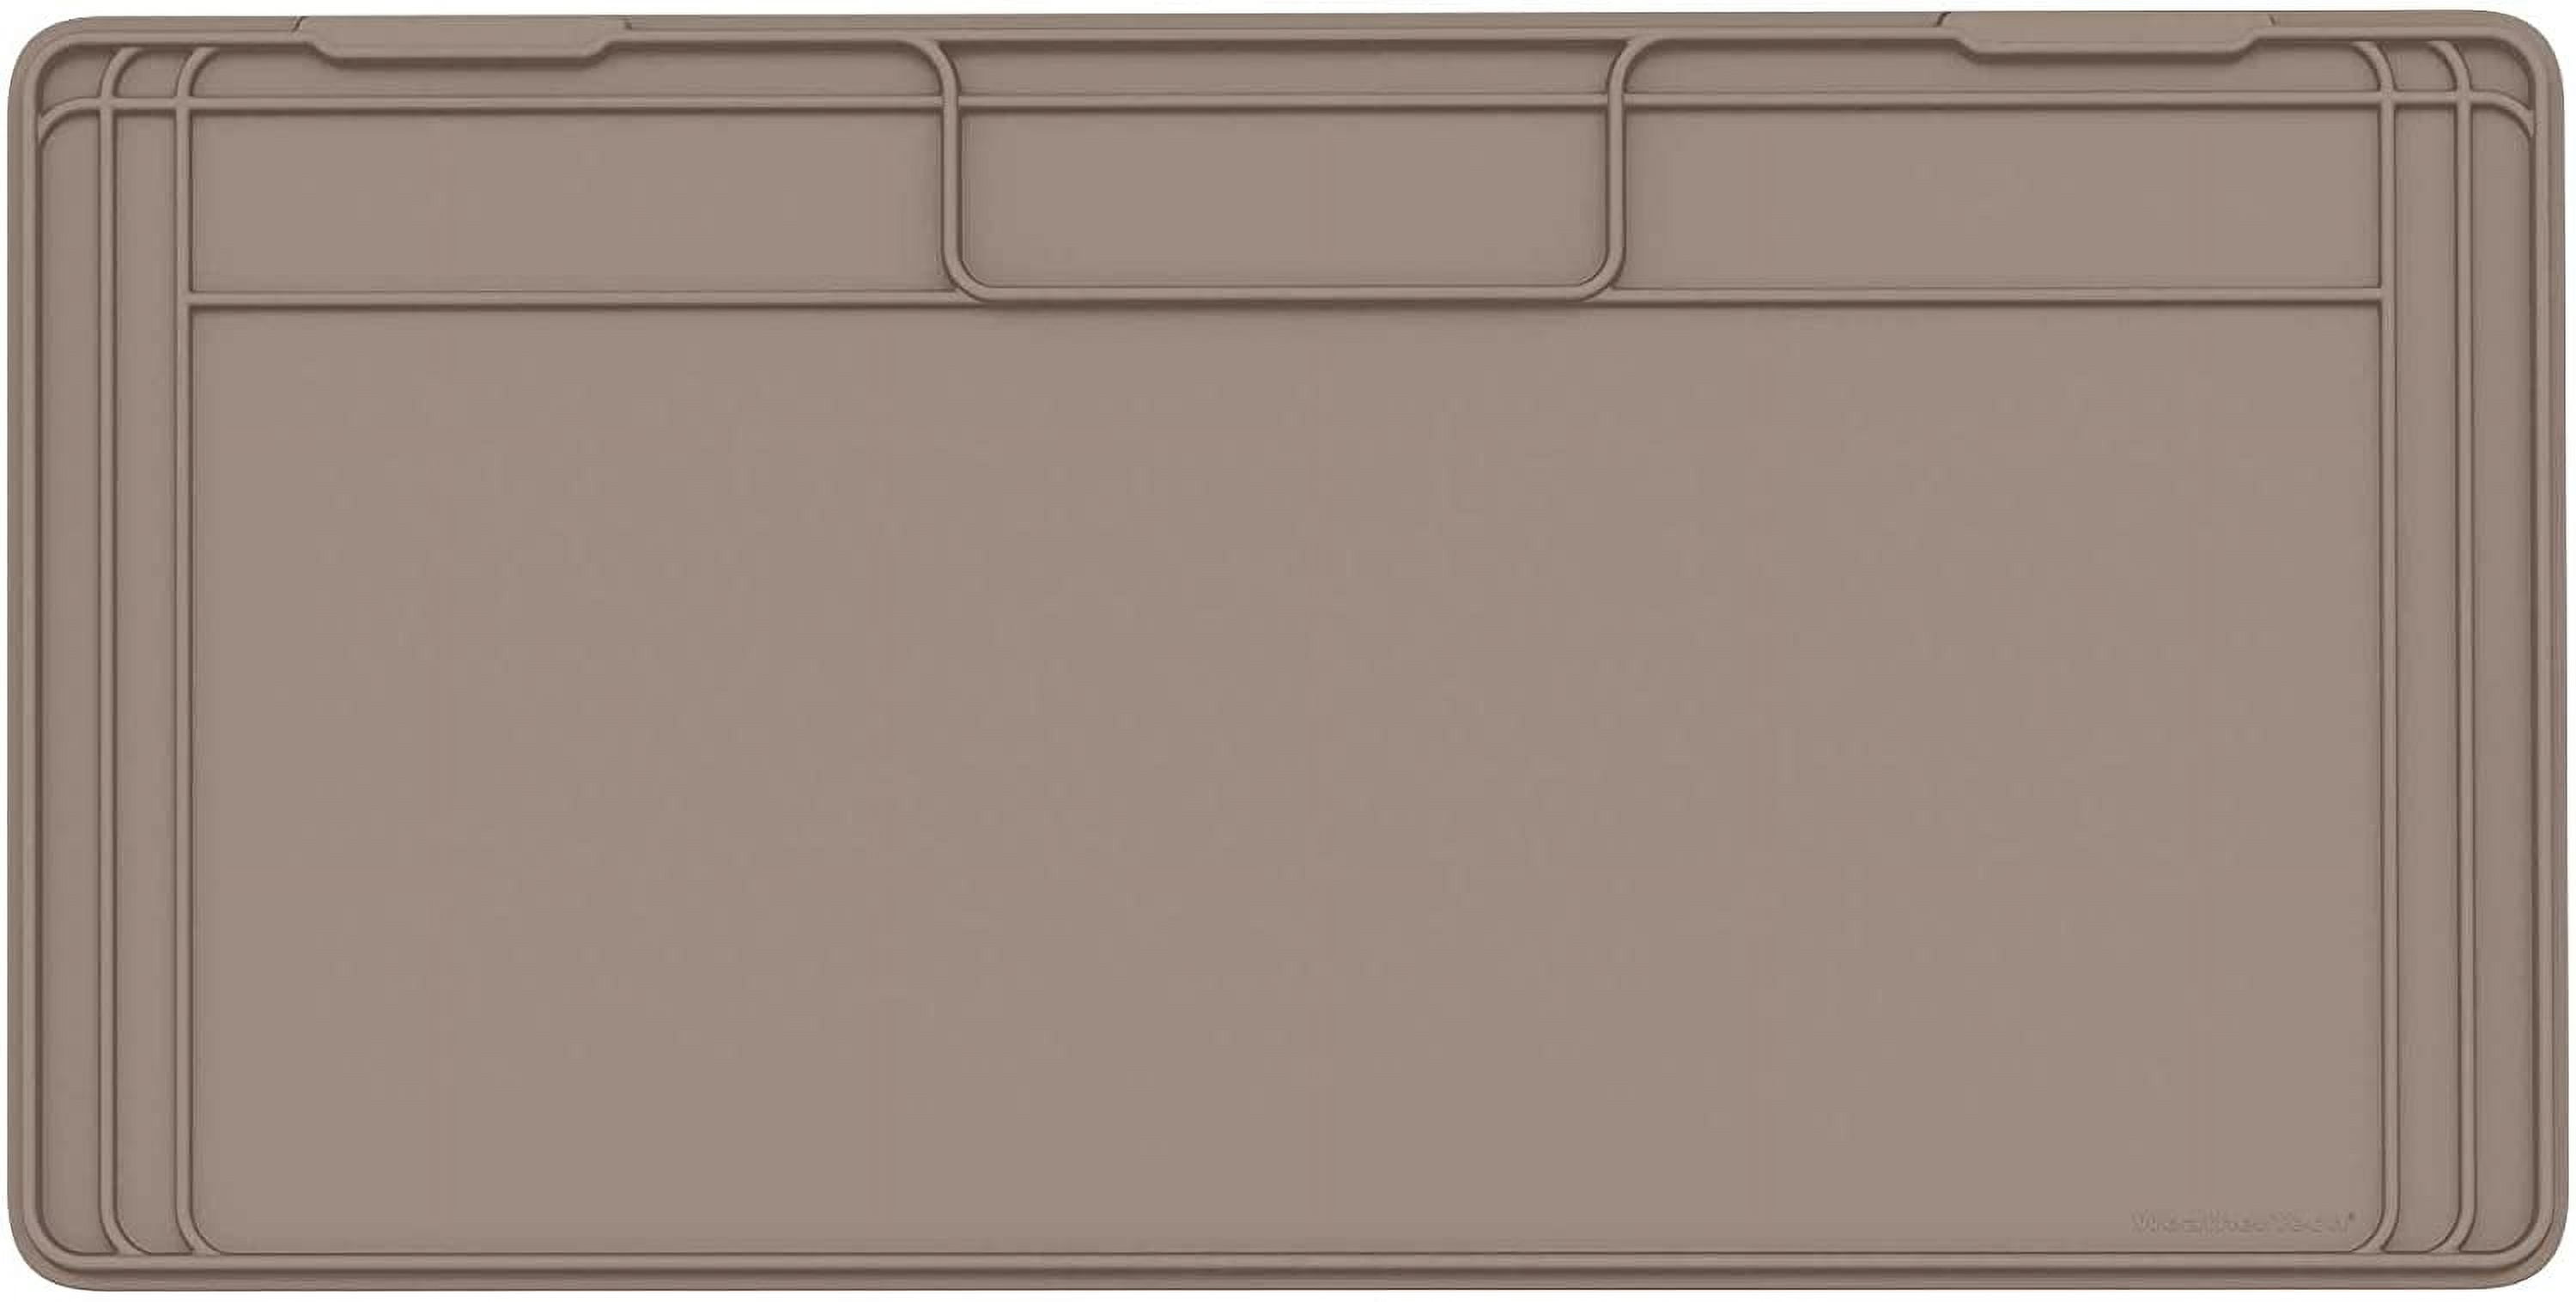 WeatherTech SinkMat - Under the Sink Cabinet Protection - 34 1/4